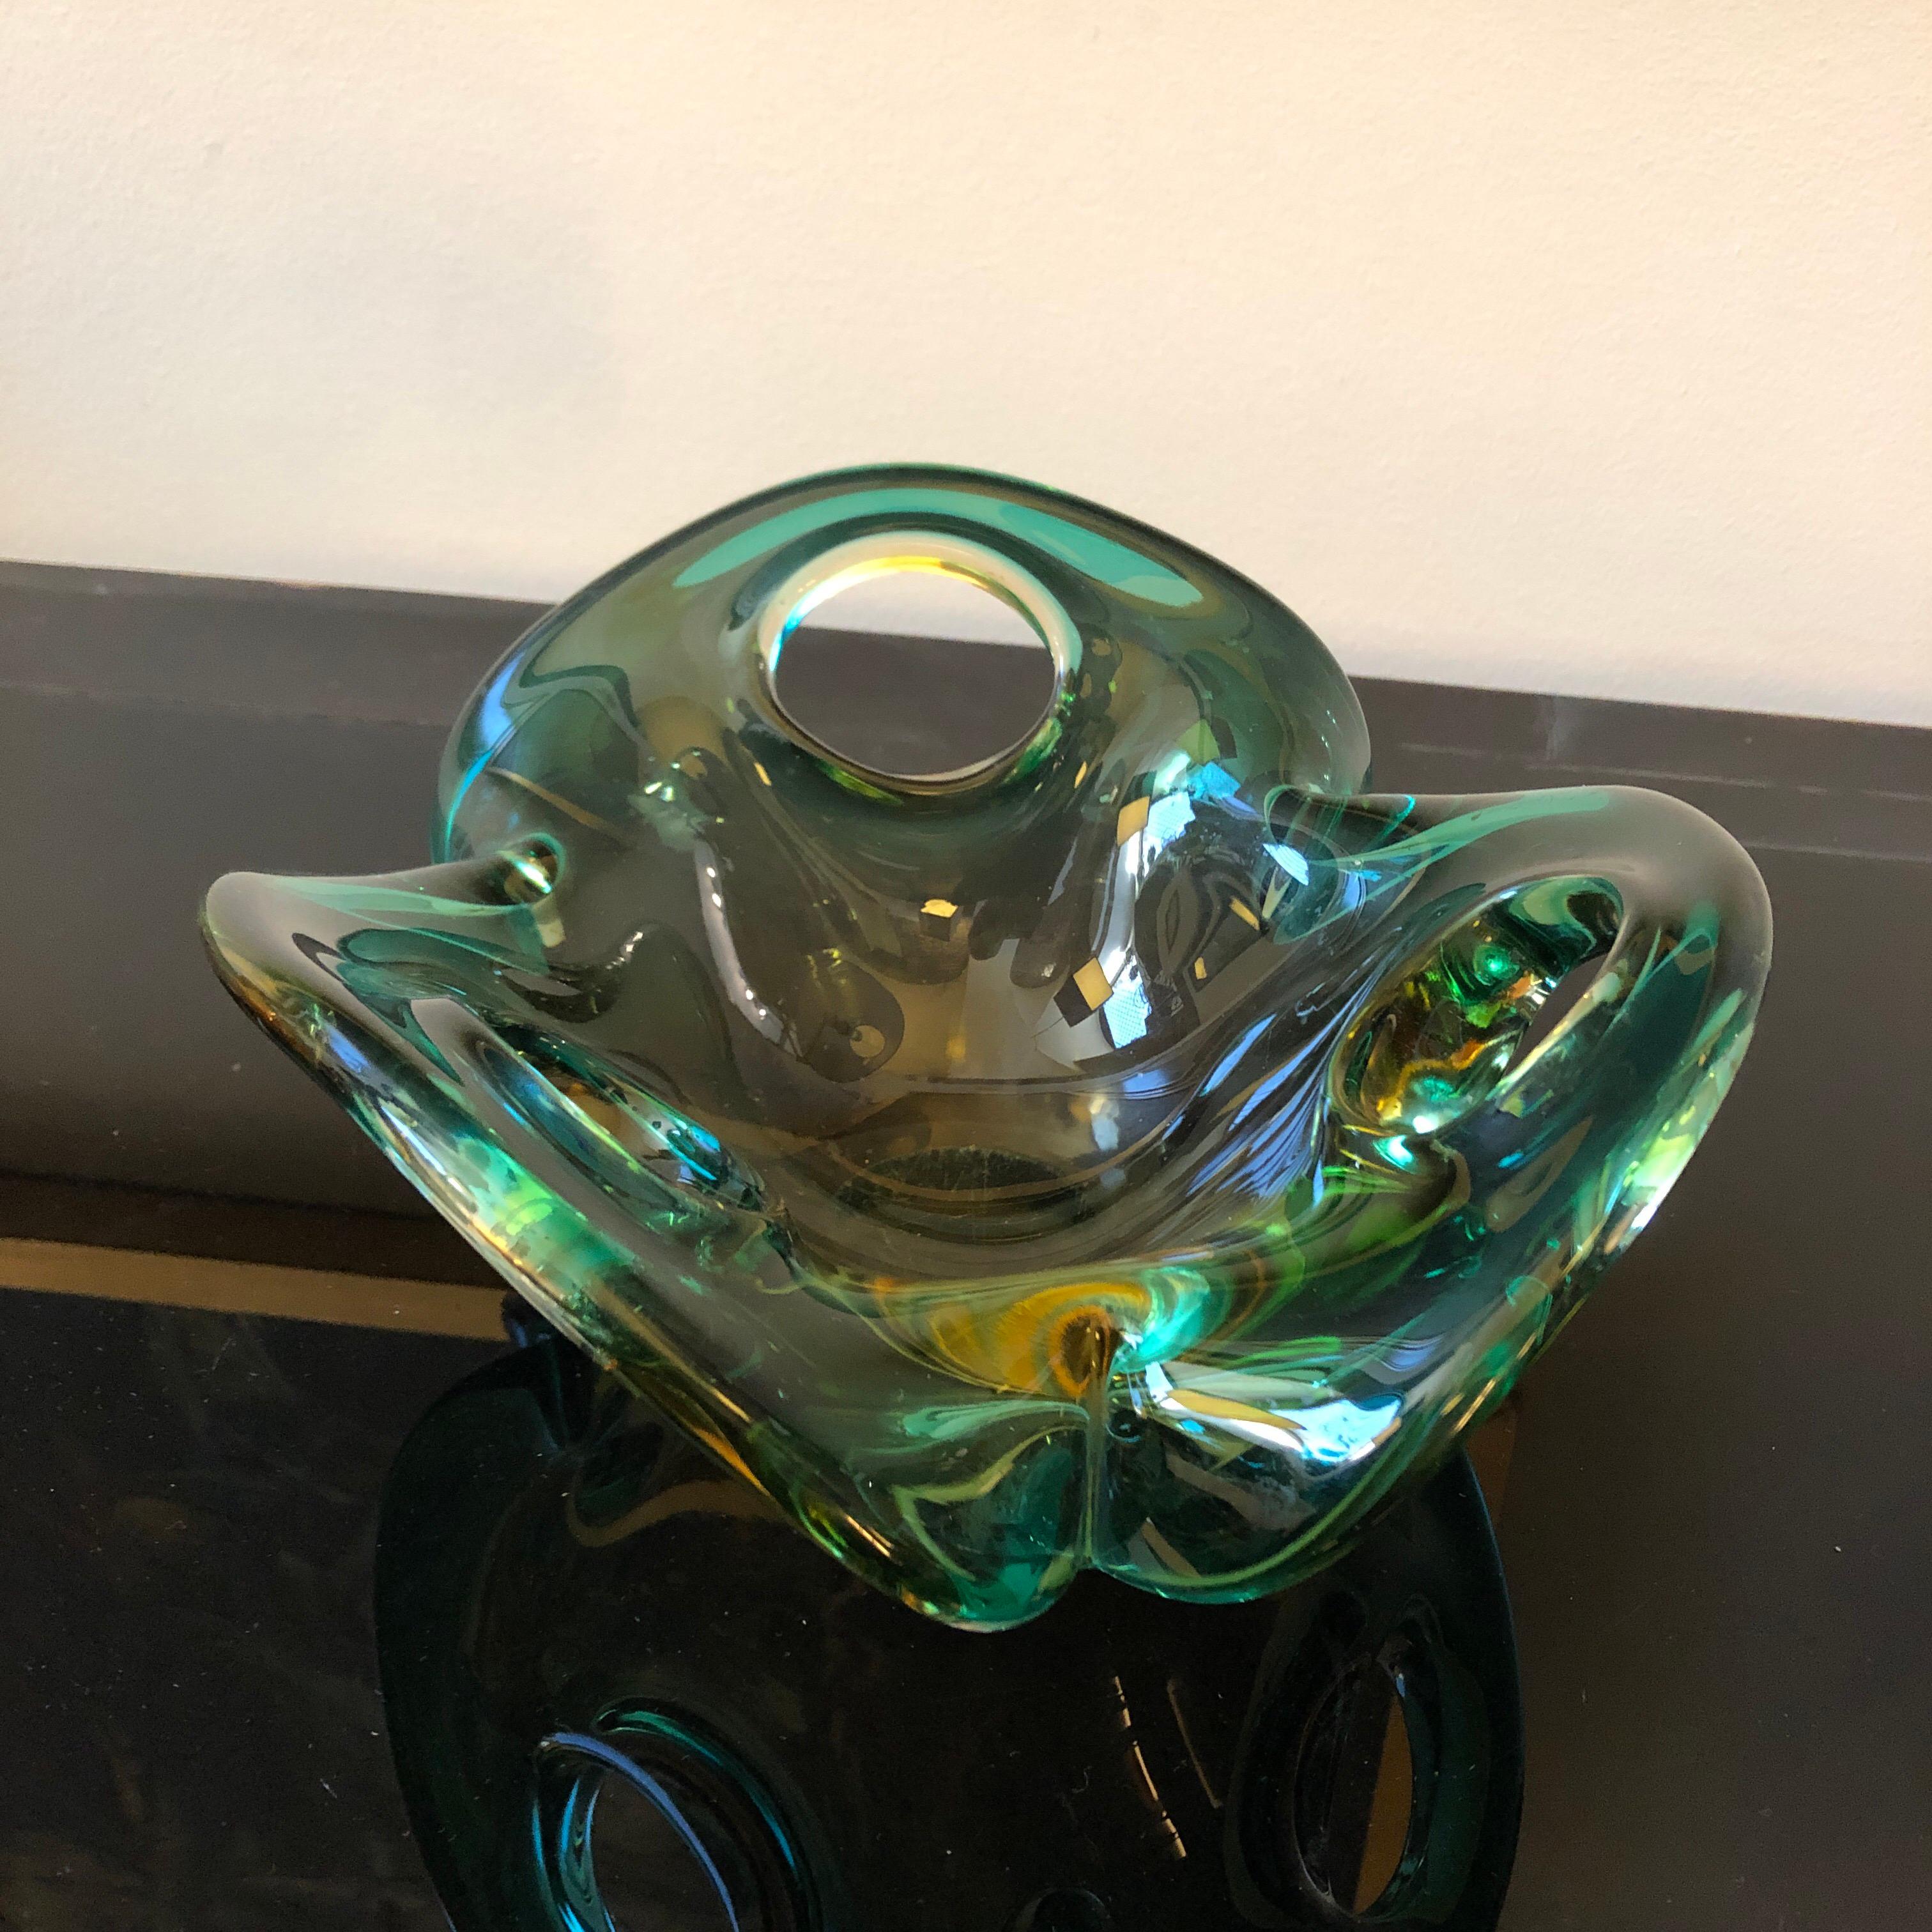 The 1970s Murano Glass Bowl by Seguso is a stunning example of Italian glassmaking artistry and the iconic Sommerso technique. Created by the renowned glassmakers Seguso, this bowl captures the essence of mid-century modern design with its vibrant